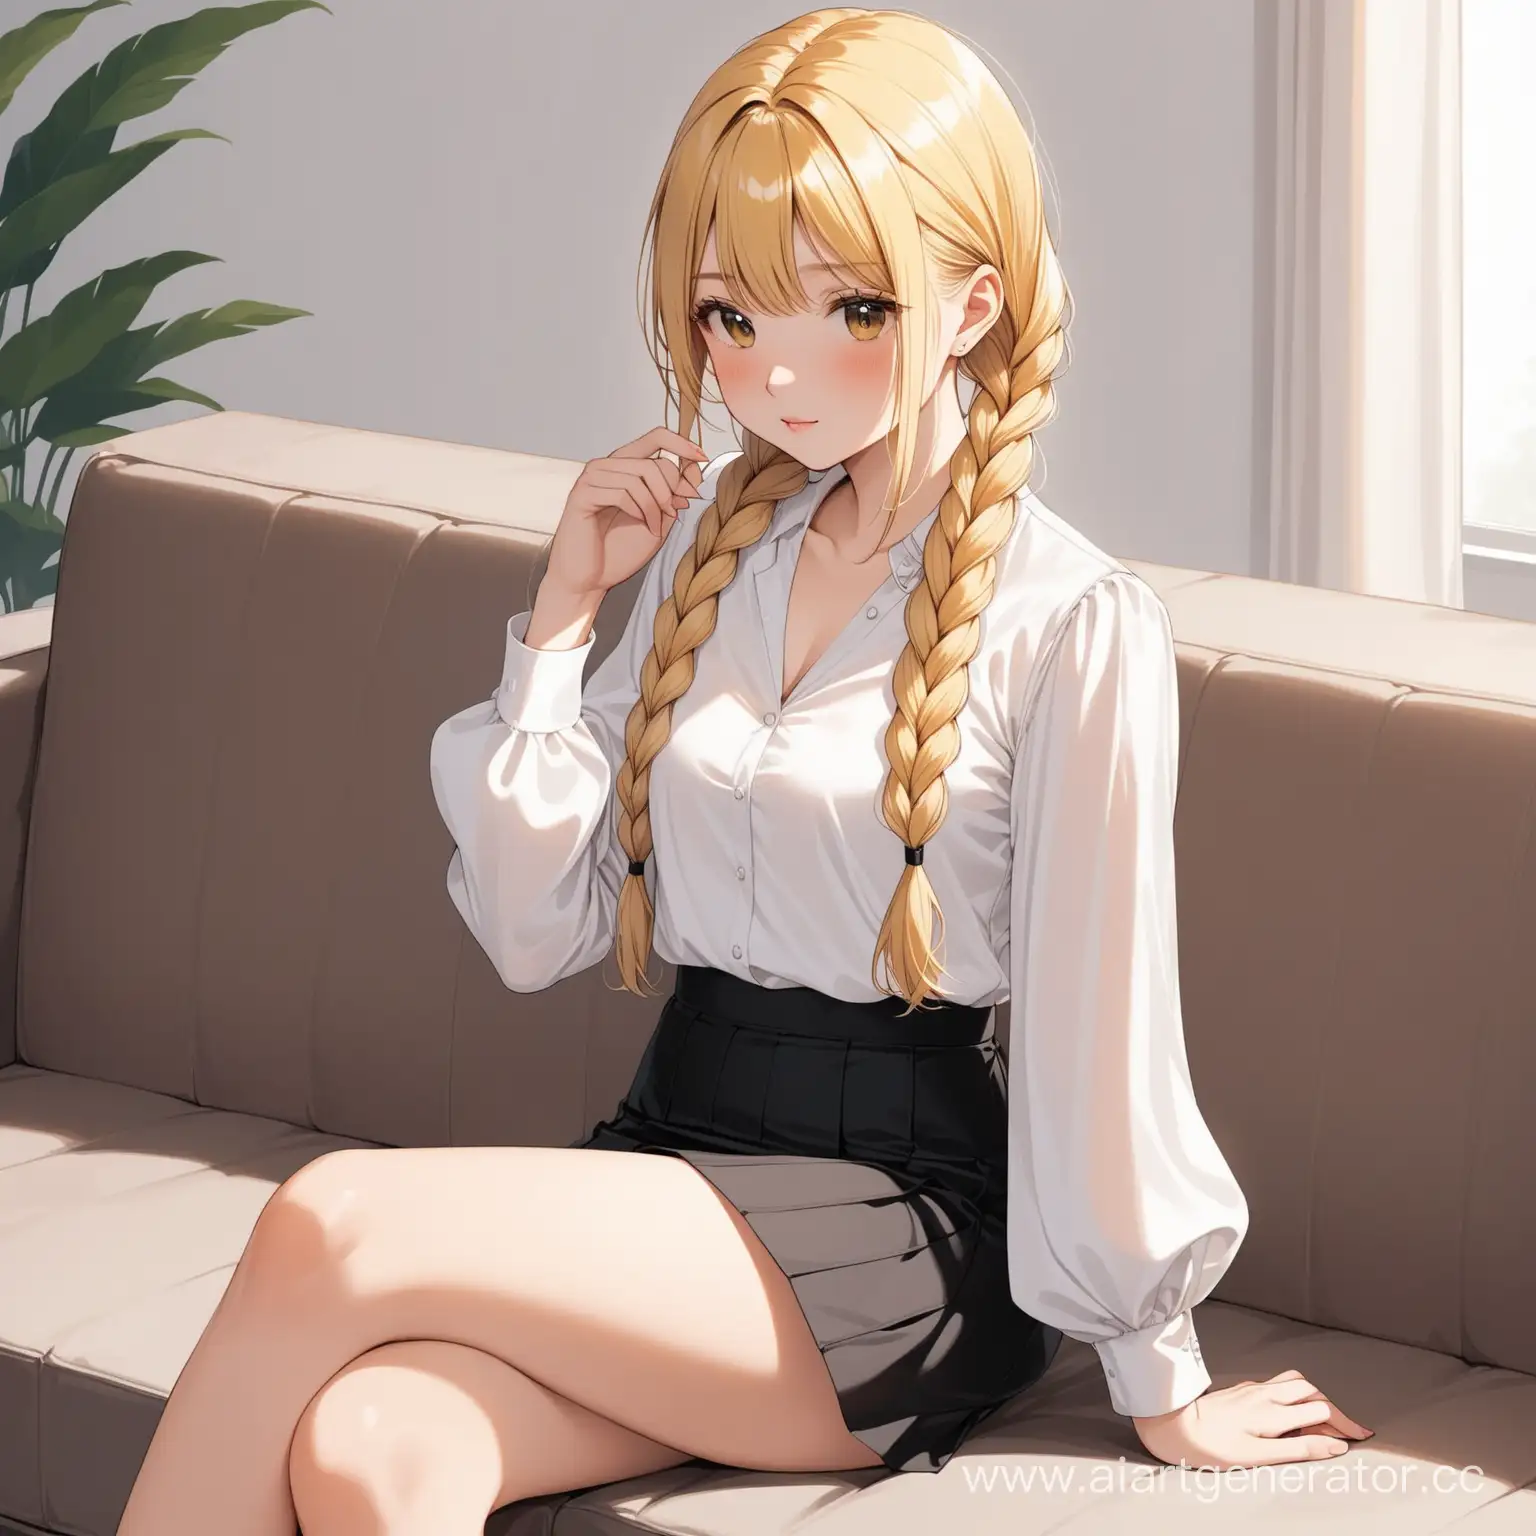 Blonde-Girl-with-Dutch-Braids-Sitting-on-Sofa-in-White-Blouse-and-Mini-Skirt